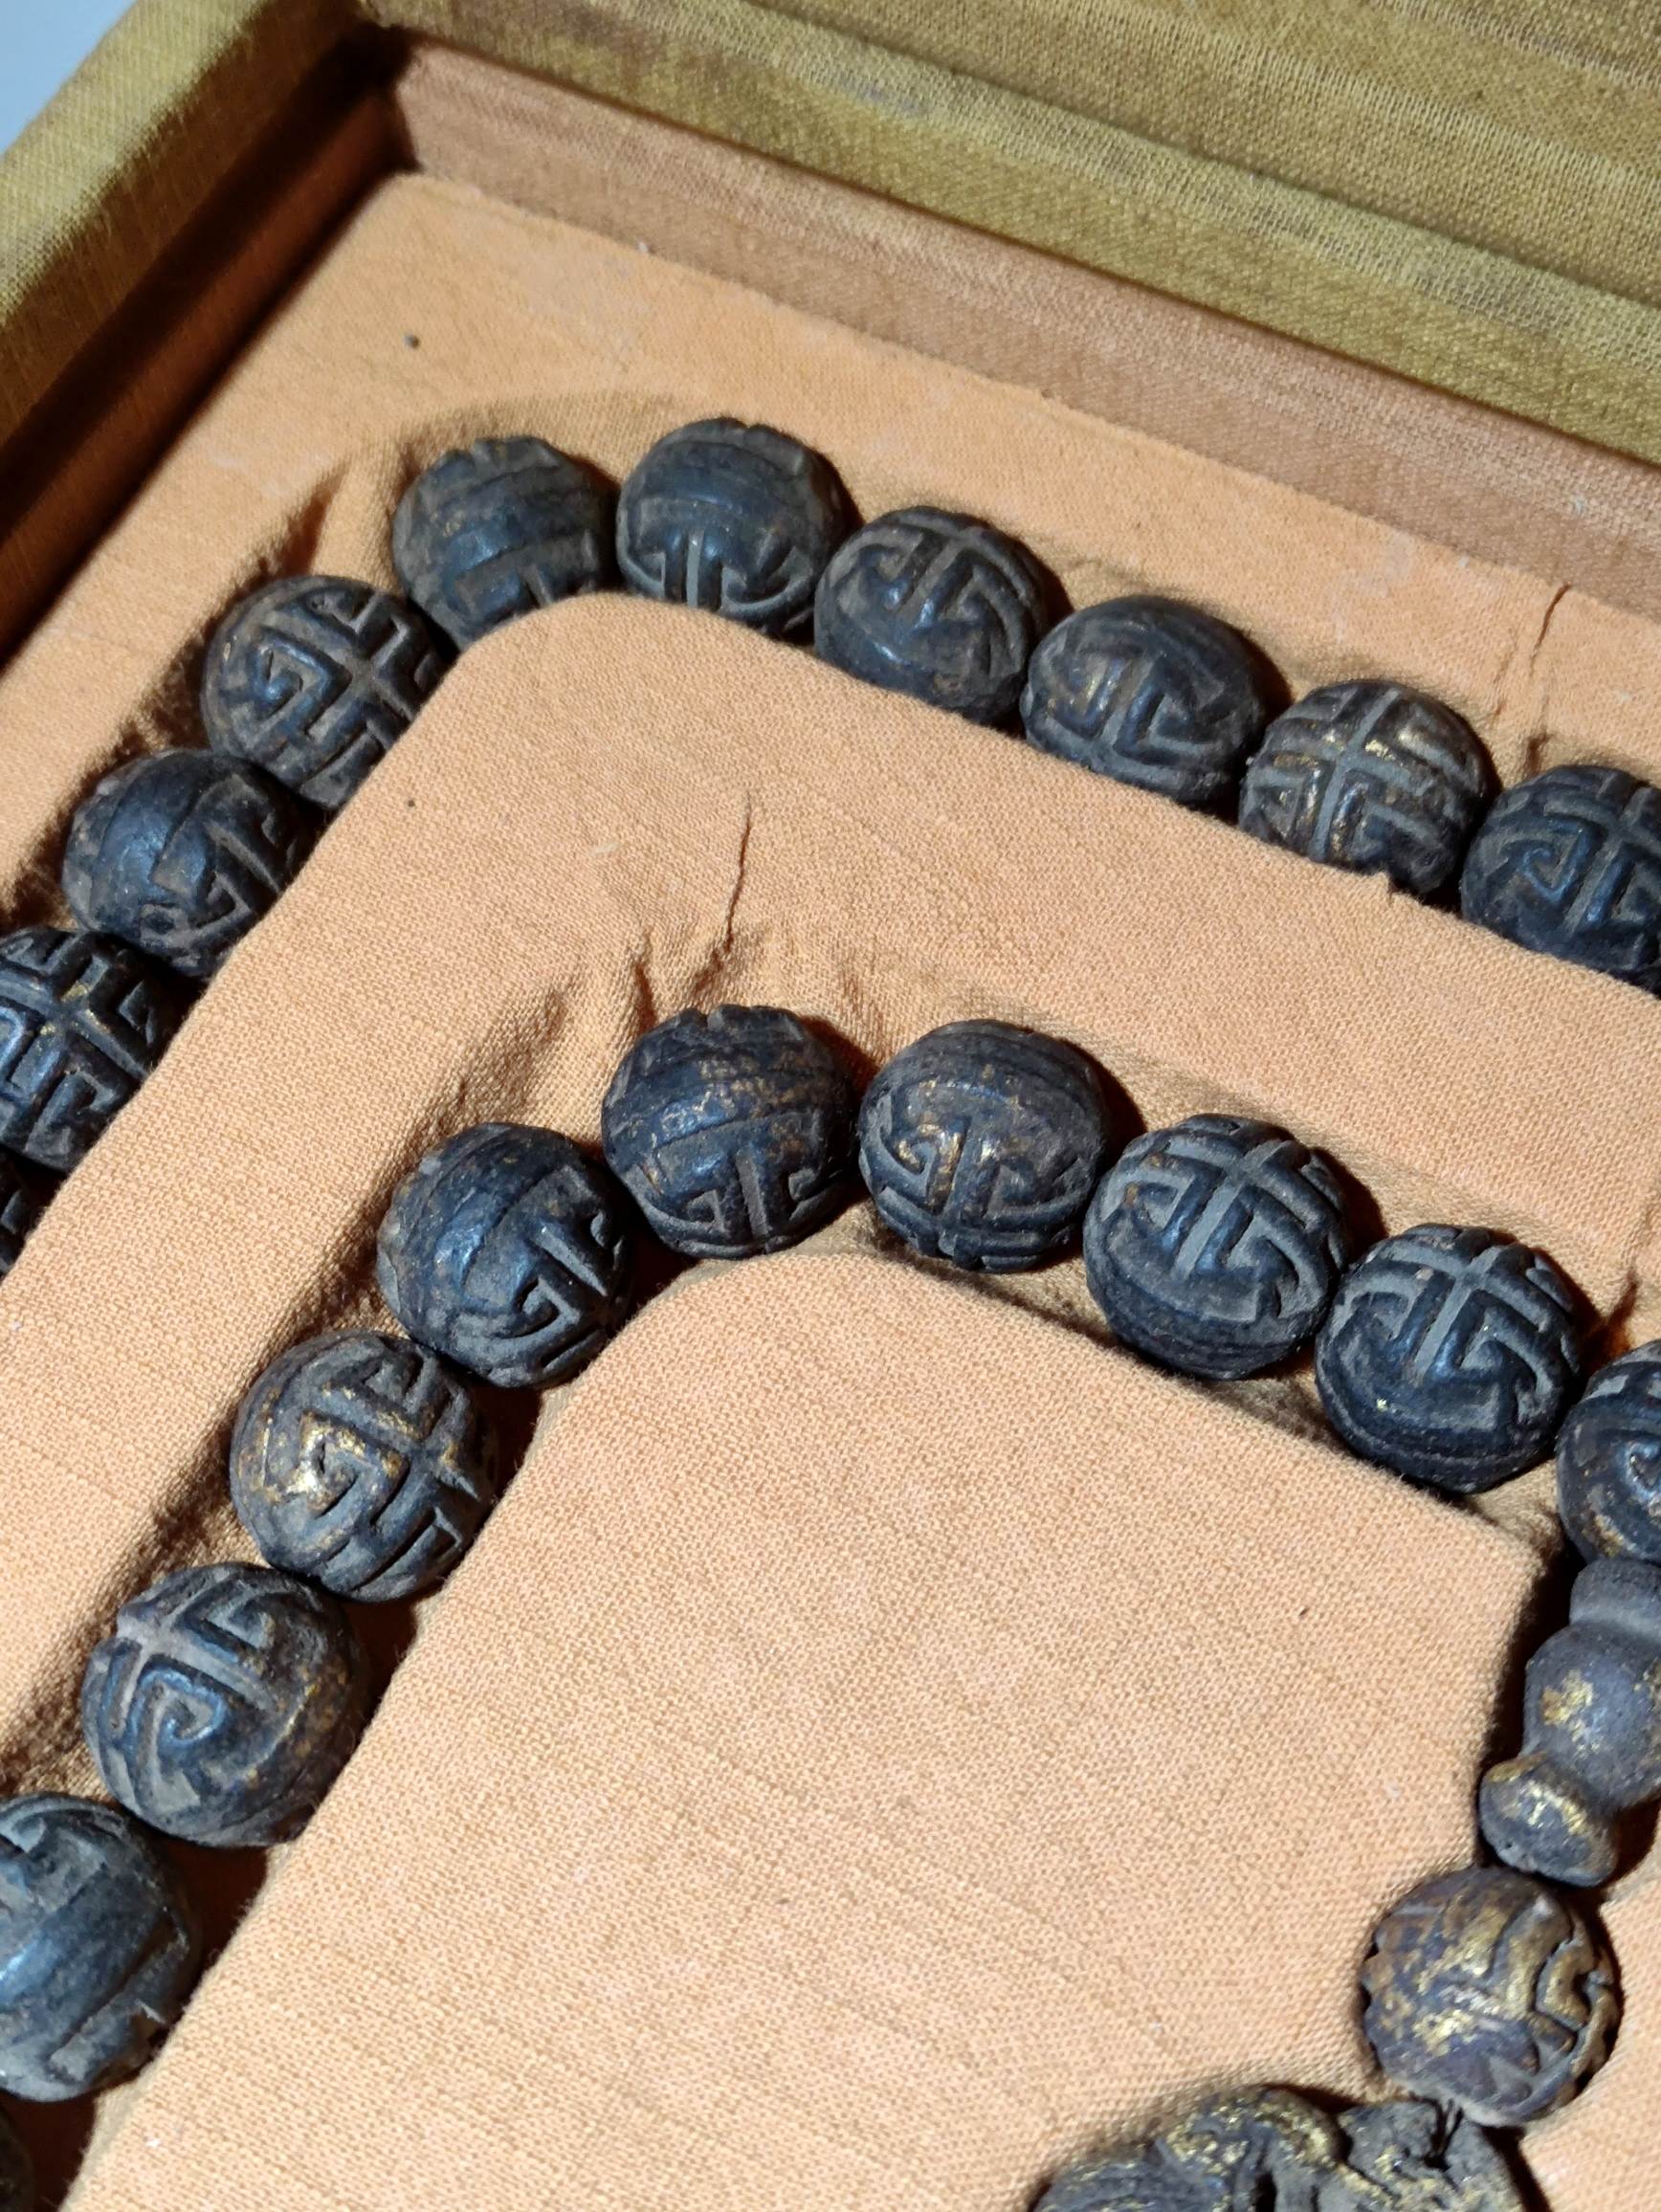 A set of agarwood beads collected by the Qing Palace - Image 6 of 9